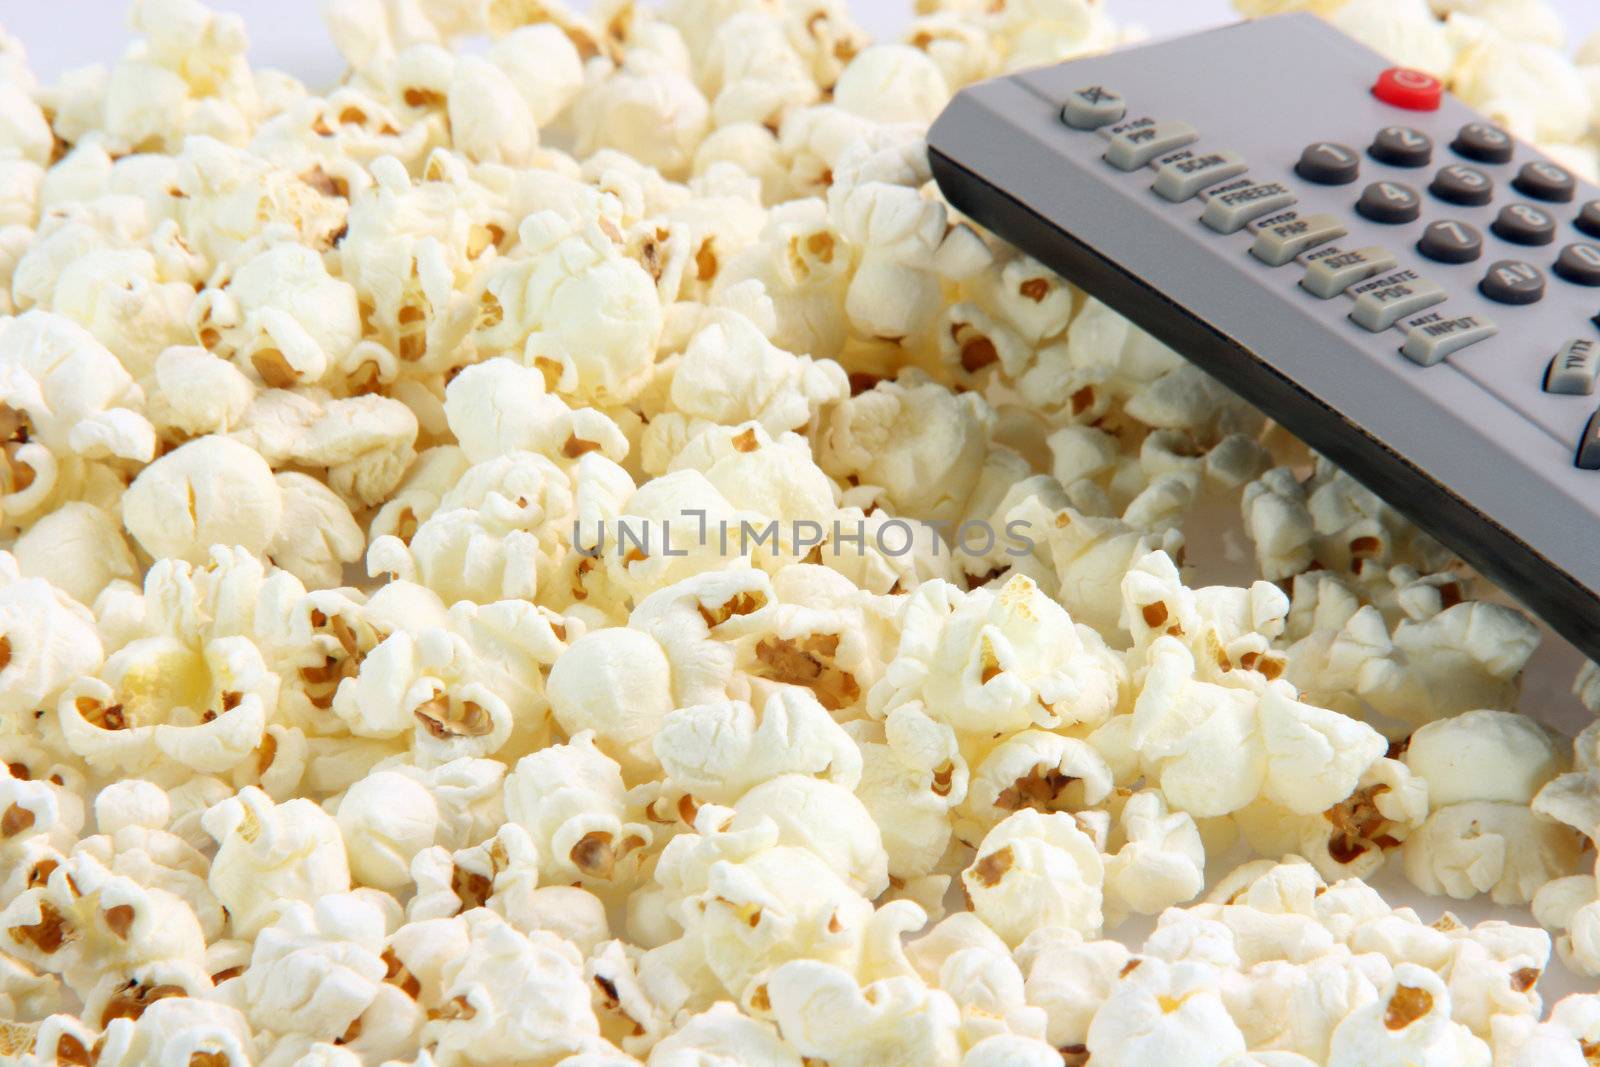 television remote control detail on pop corn background food and entertainment conceps